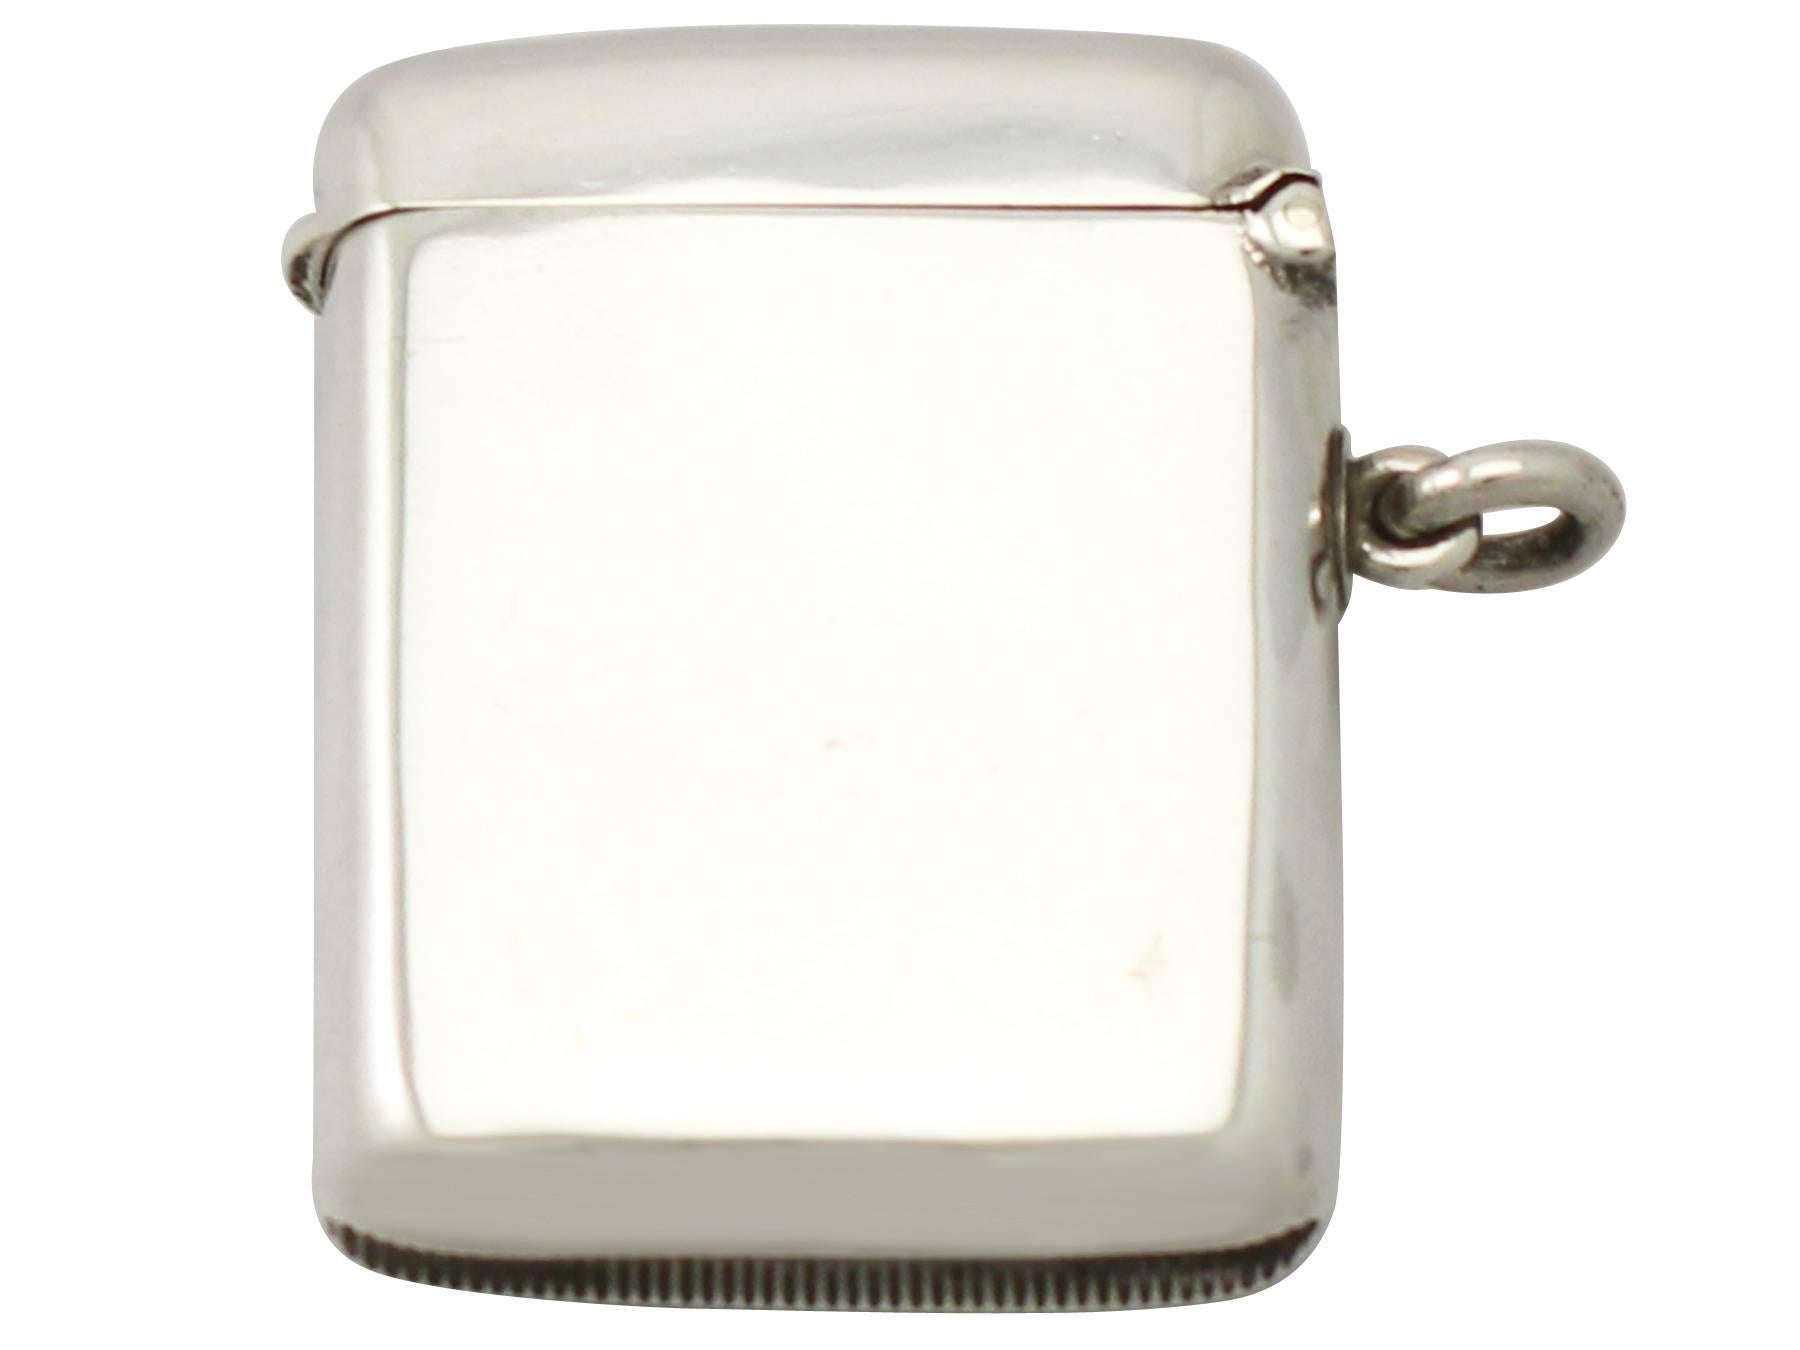 A fine and impressive antique Edwardian English sterling silver and enamel vesta case; an addition to our enamel and silver collection

This fine antique sterling silver vesta case has a plain rectangular rounded form.

The anterior surface is